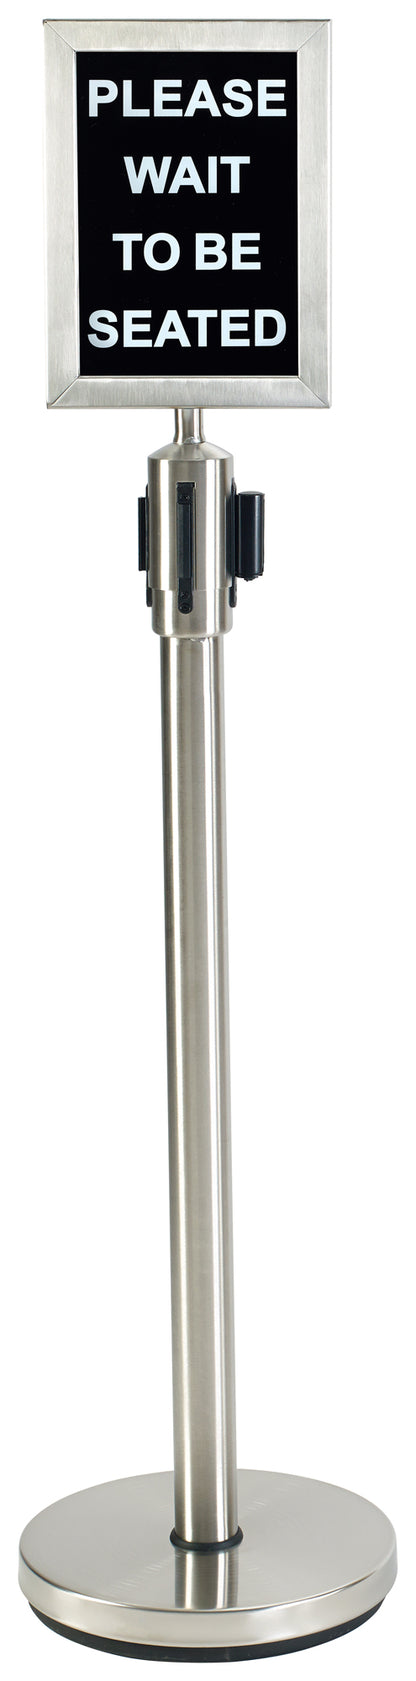 CGS-38S - Stanchion Post with Retractable Belt - Stainless